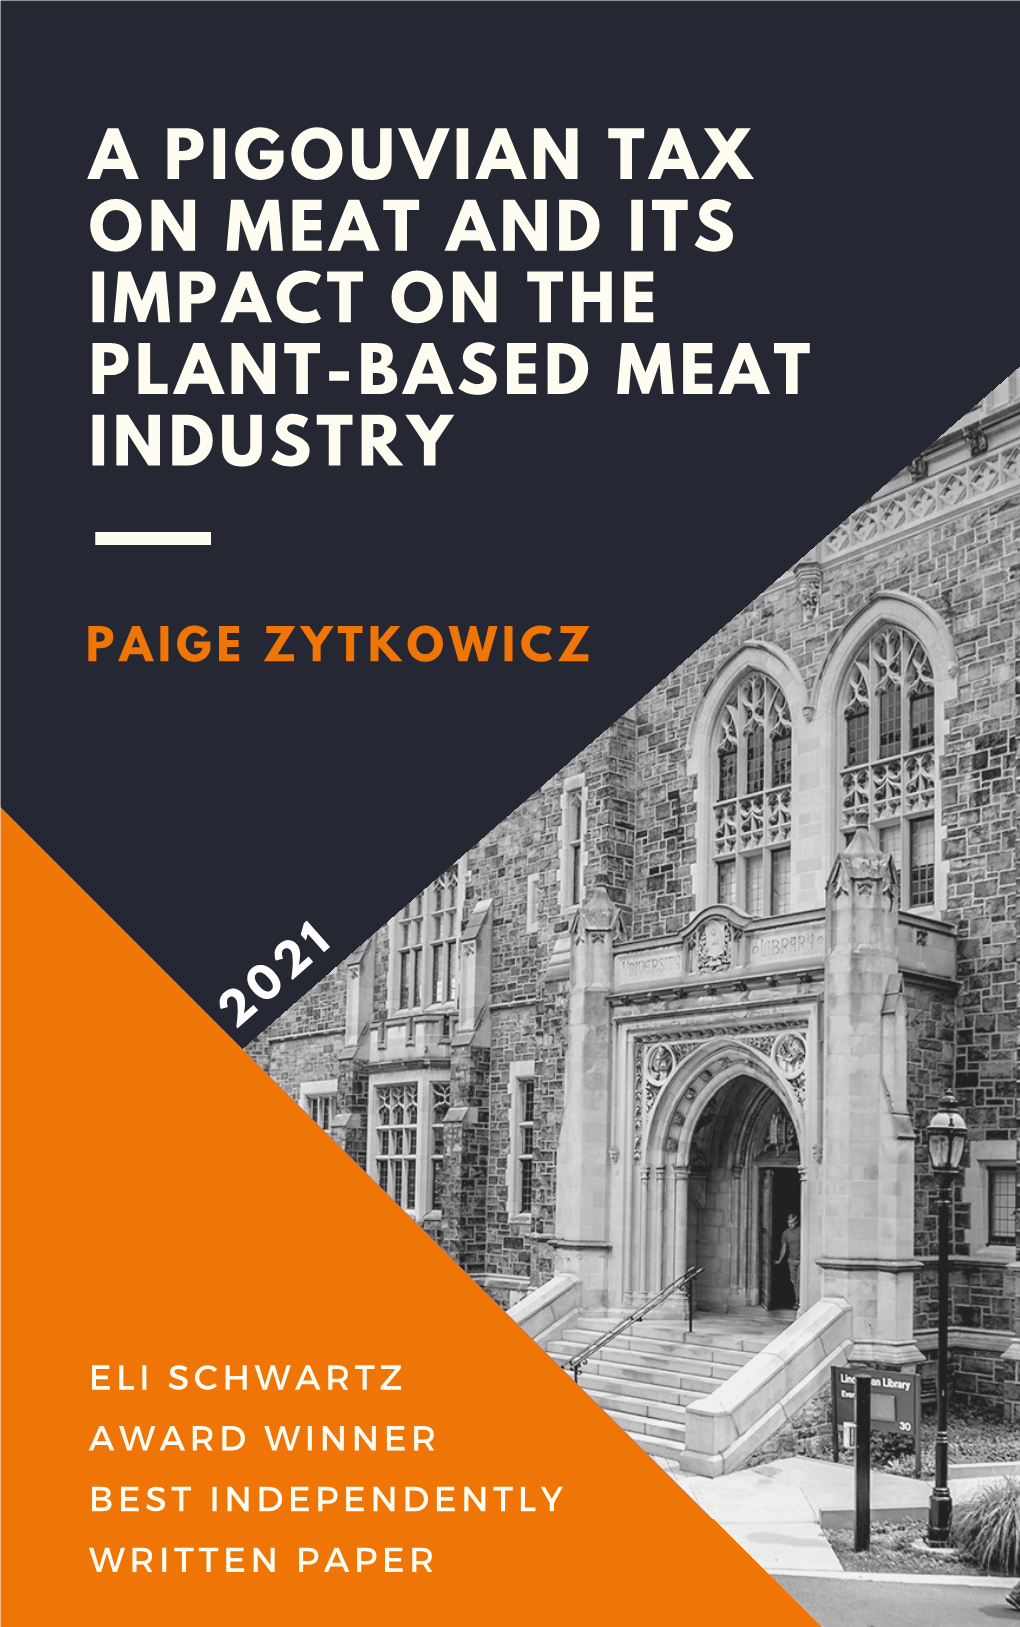 A Pigouvian Tax on Meat and Its Impact on the Plant-Based Meat Industry